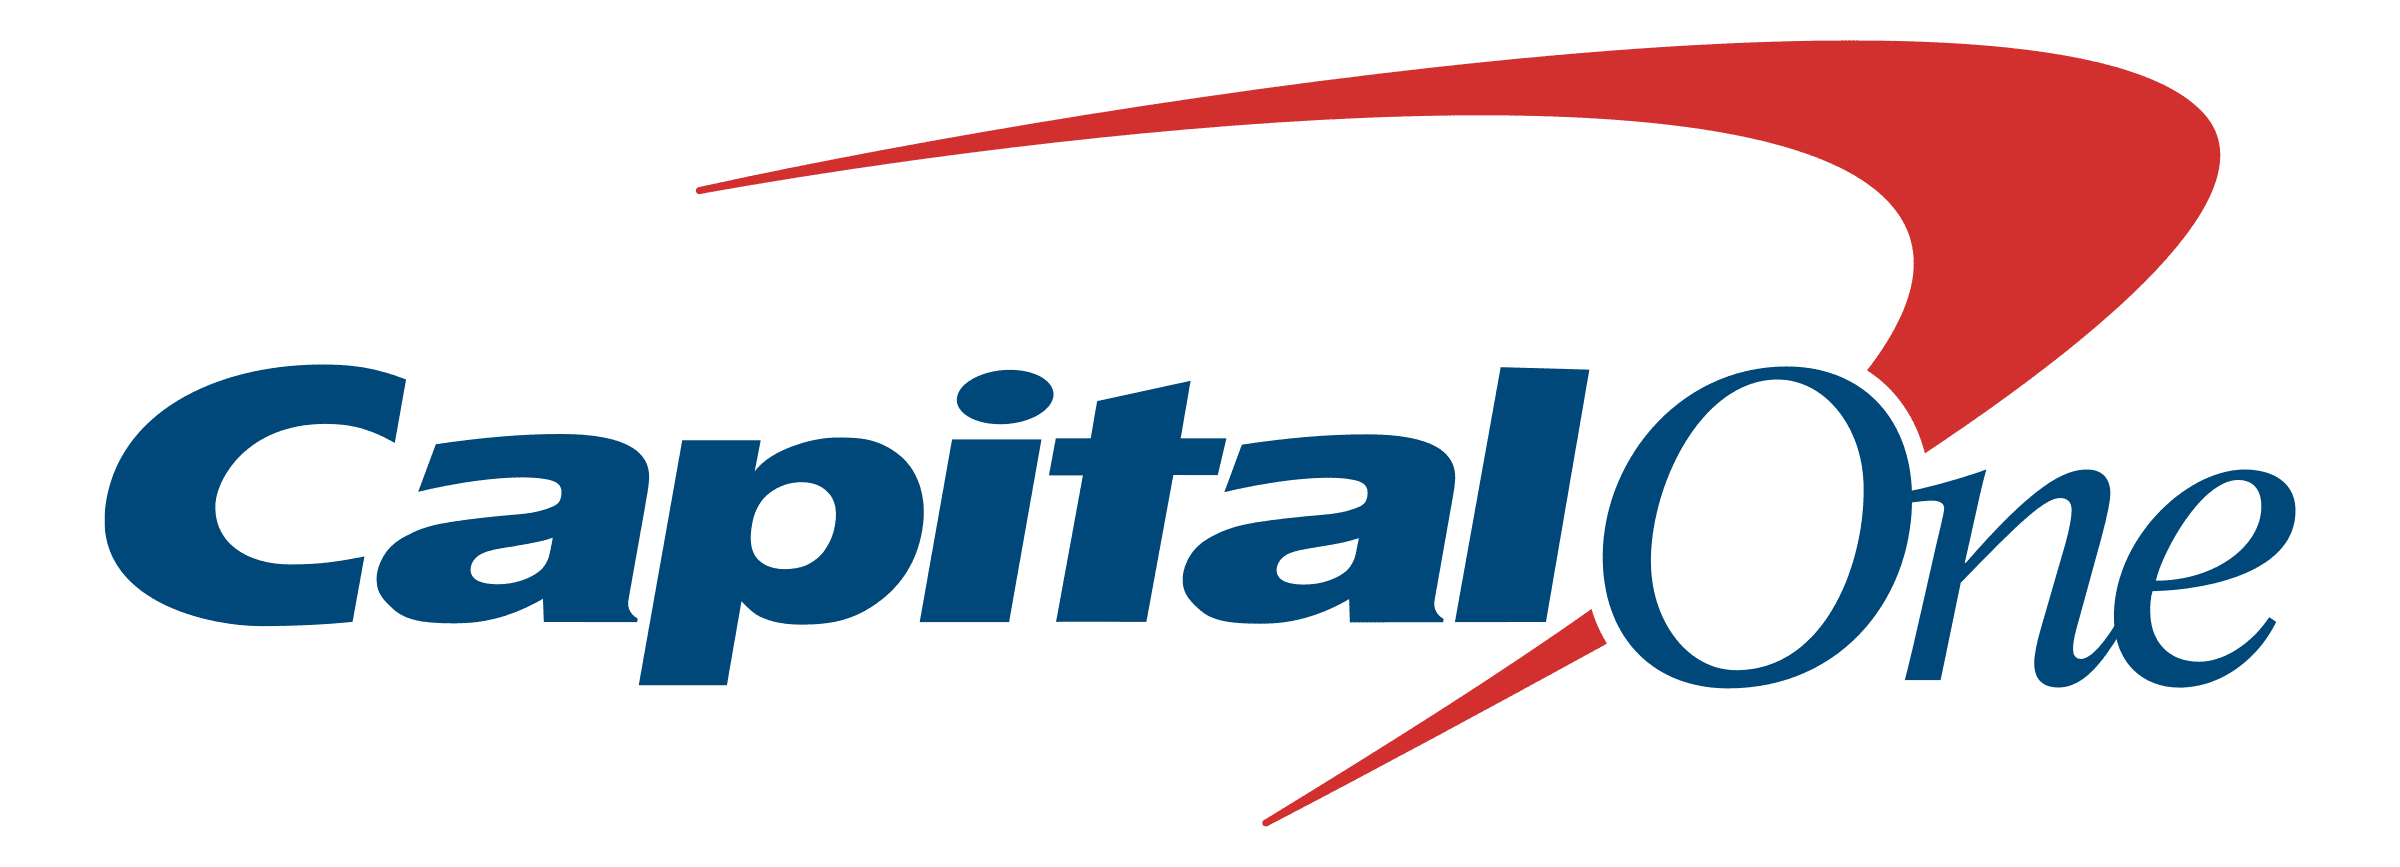 CapitalOne_Larger.png